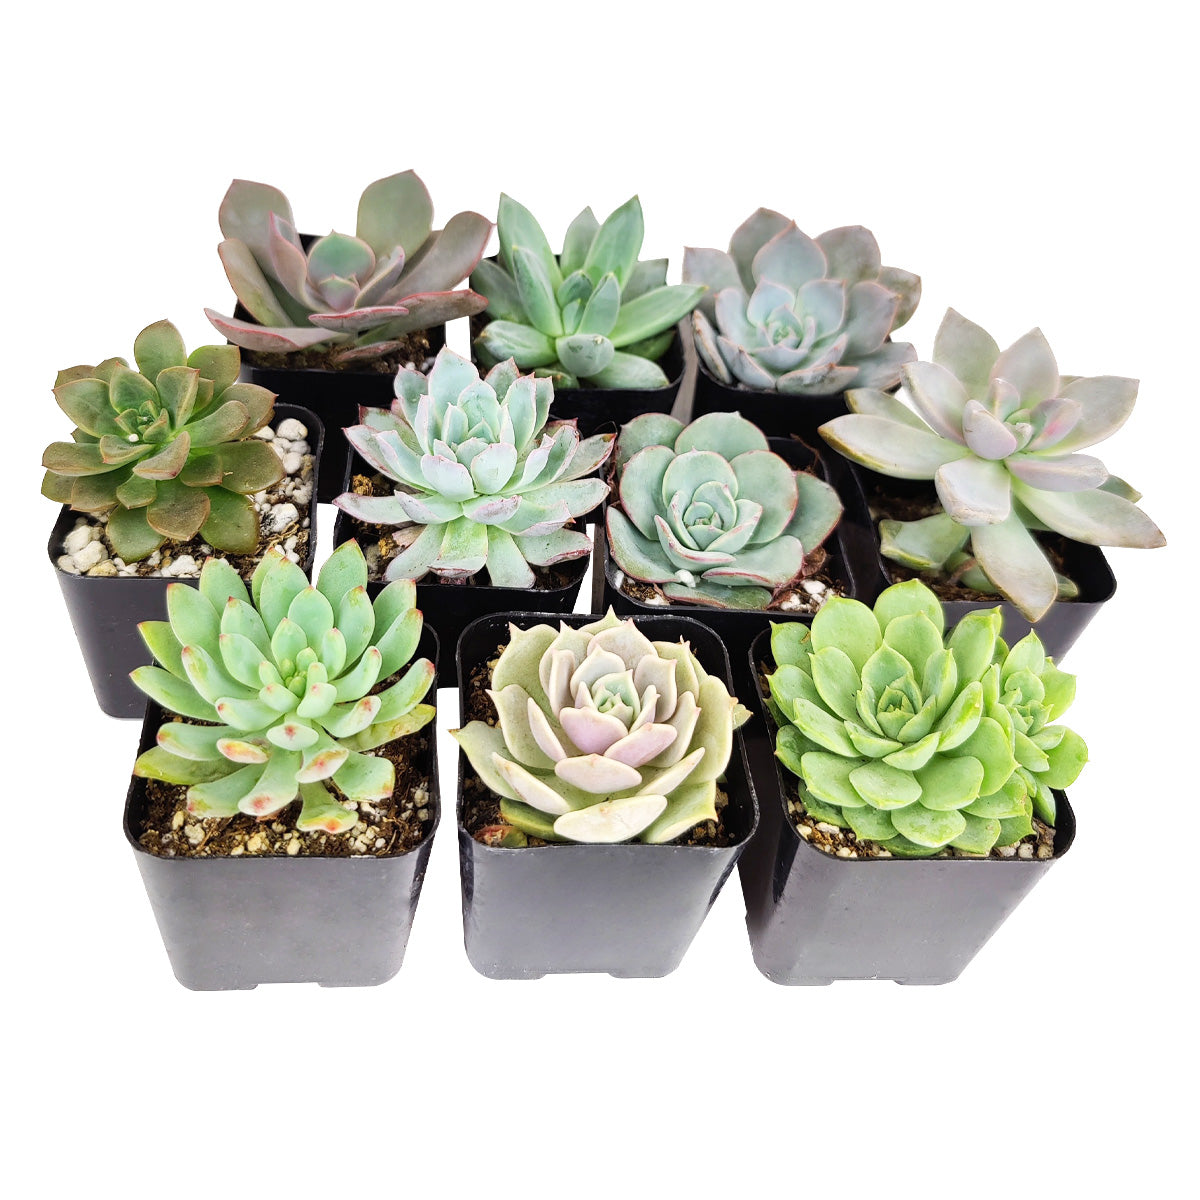 Live Echeveria Assorted Pack for sale,  echeveria, echeveria succulent, echeveria types, succulent shop, Succulent assorted pack perfect for weddings, Echeveria rosette succulent for wedding